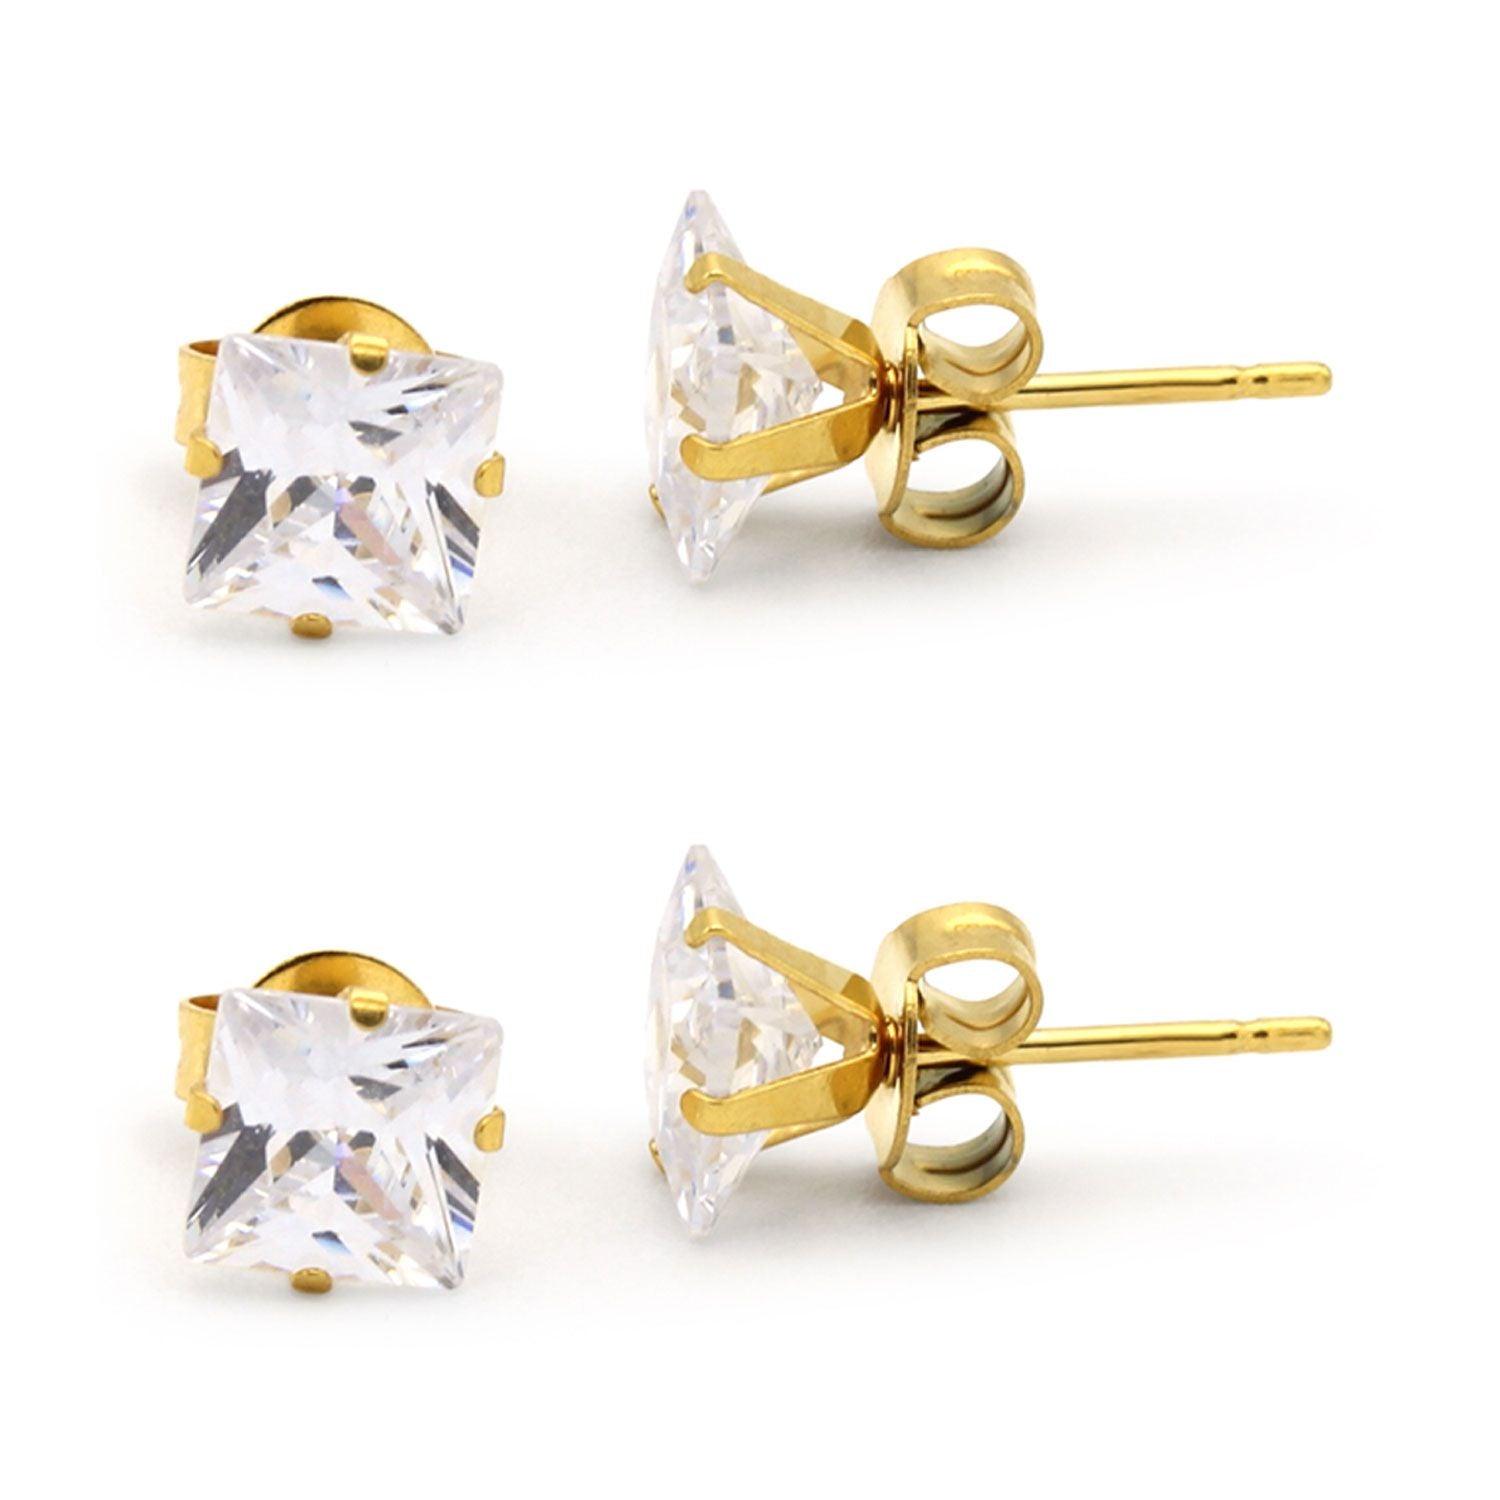 Cubic Zirconia Square 14K Gold Plated Stud Earrings Set Of 2 Stainless Steel Jewelry Men Women